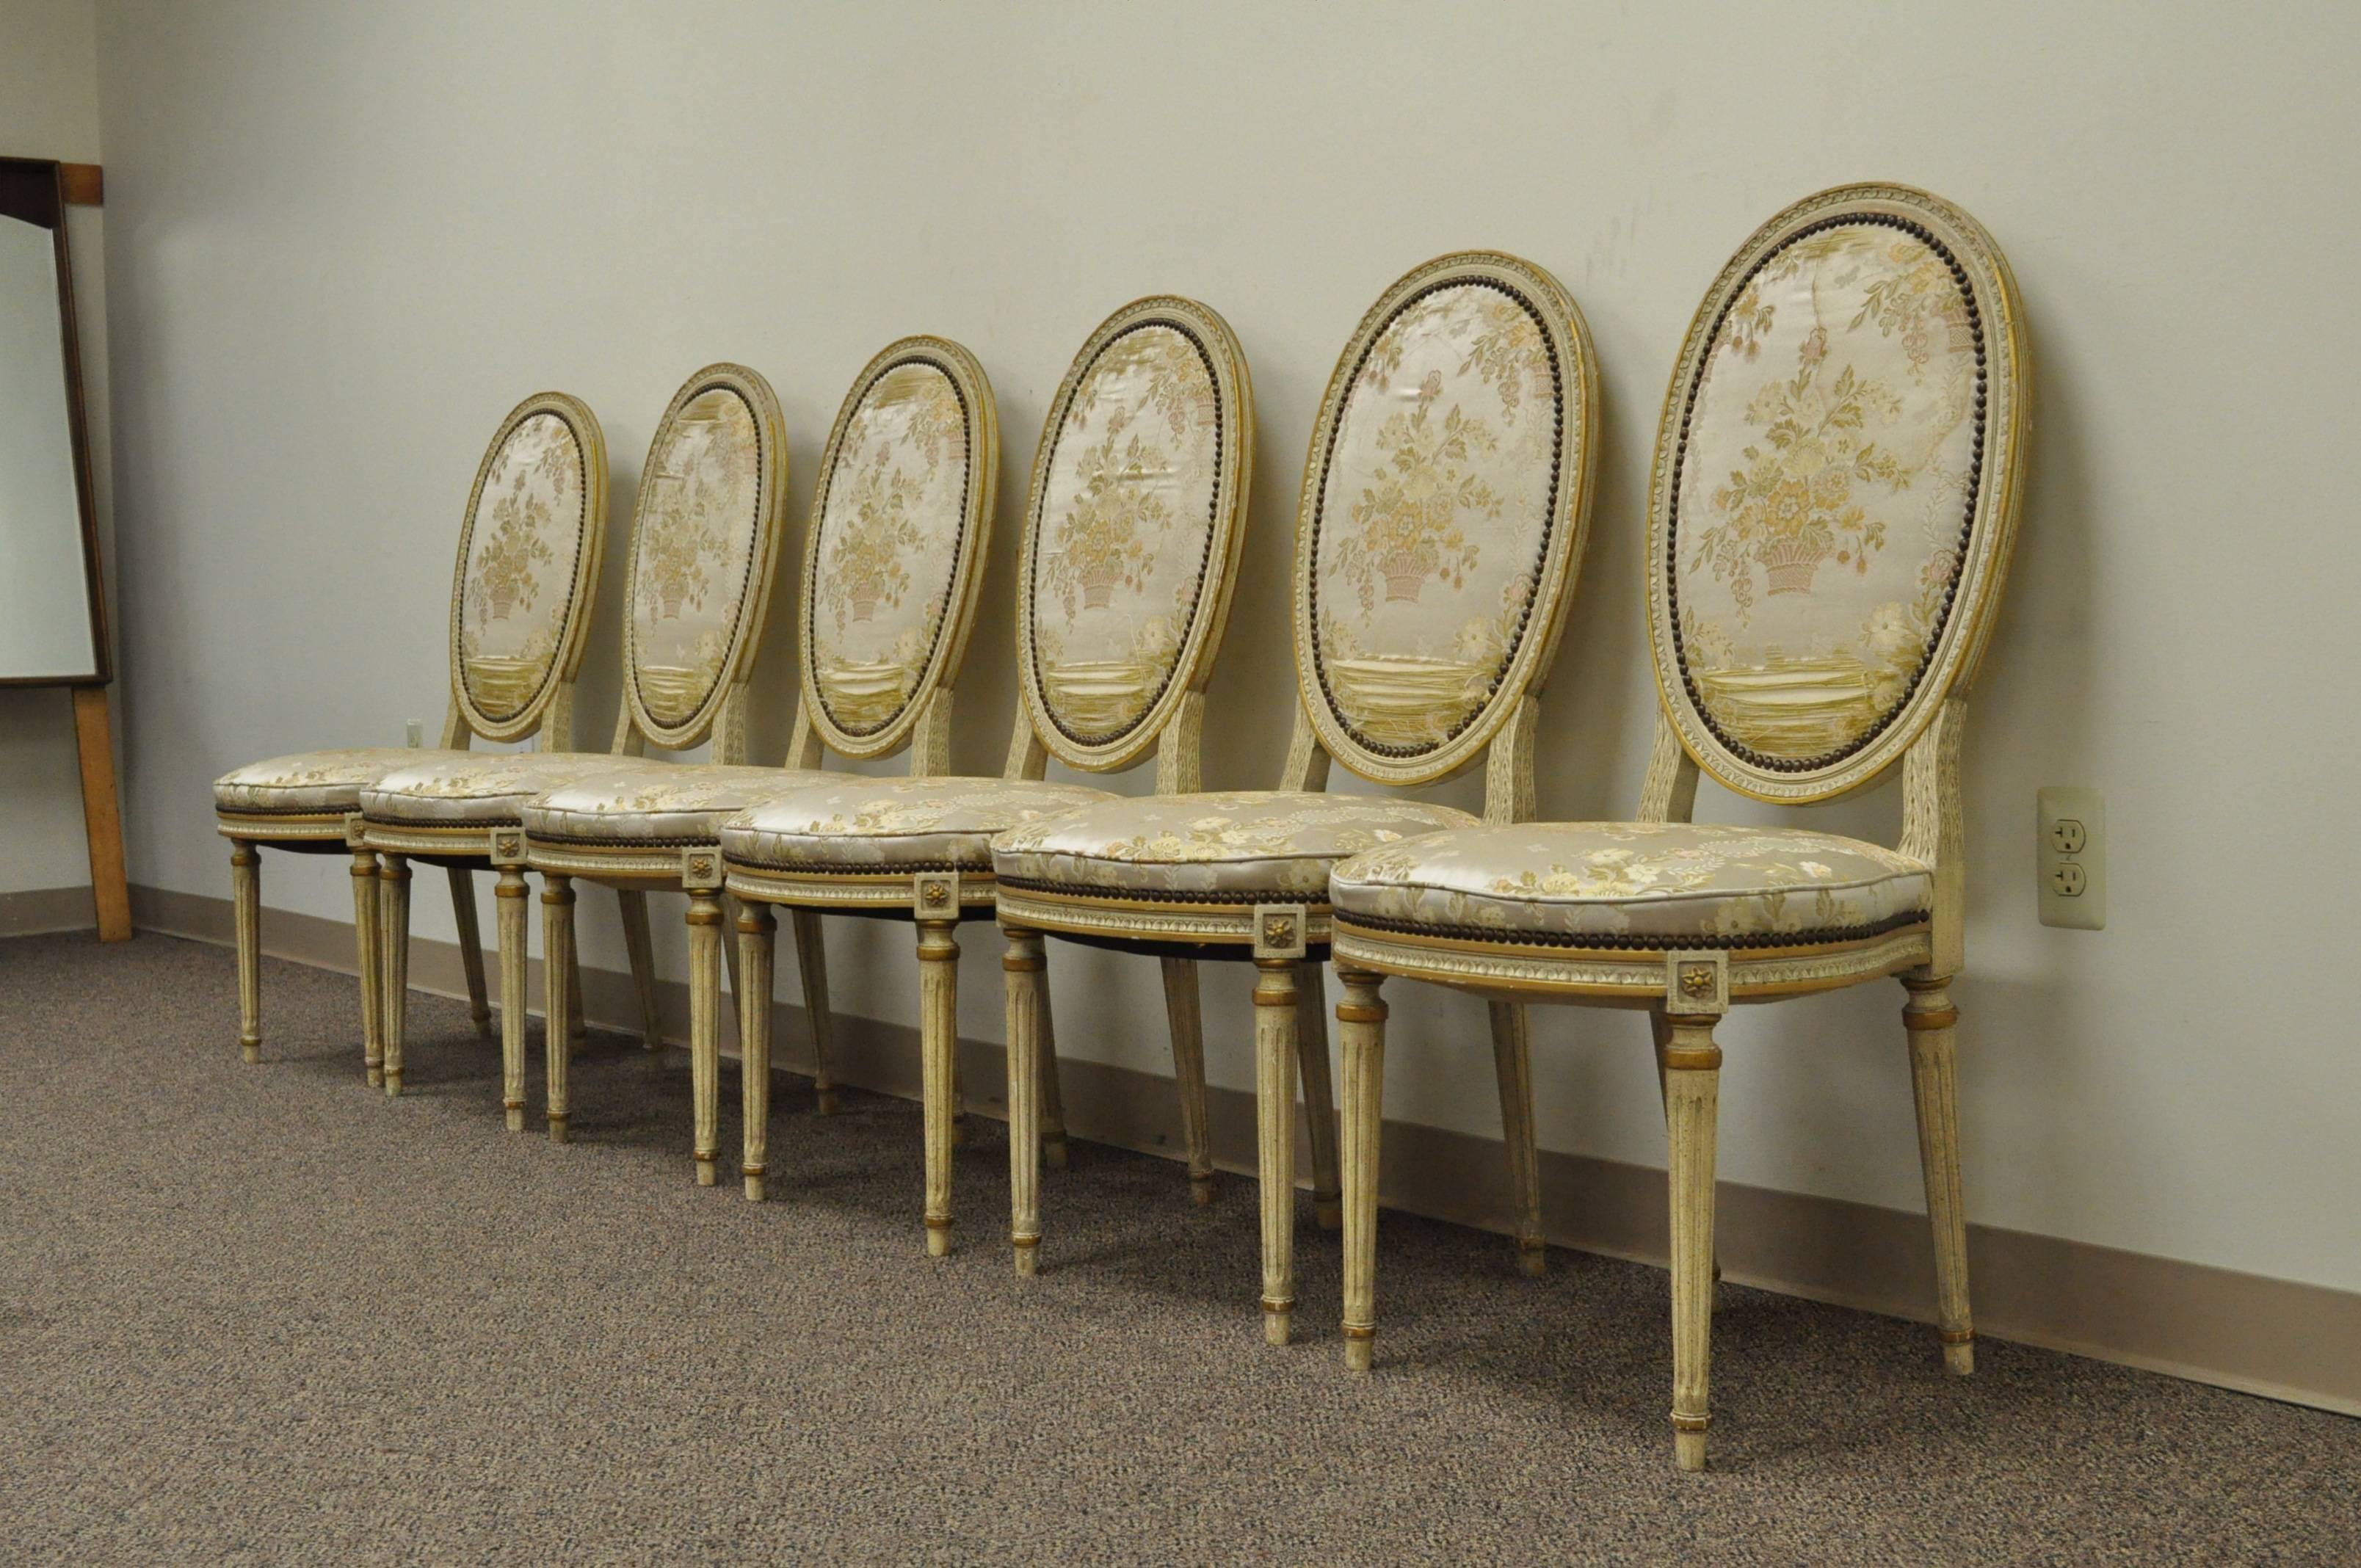 Remarkable set of 6 French Louis XVI Style Dining Chairs. Chairs features reeded and tapered legs, medallion backs, carvings to the frames, and upholstered backs and seats. 